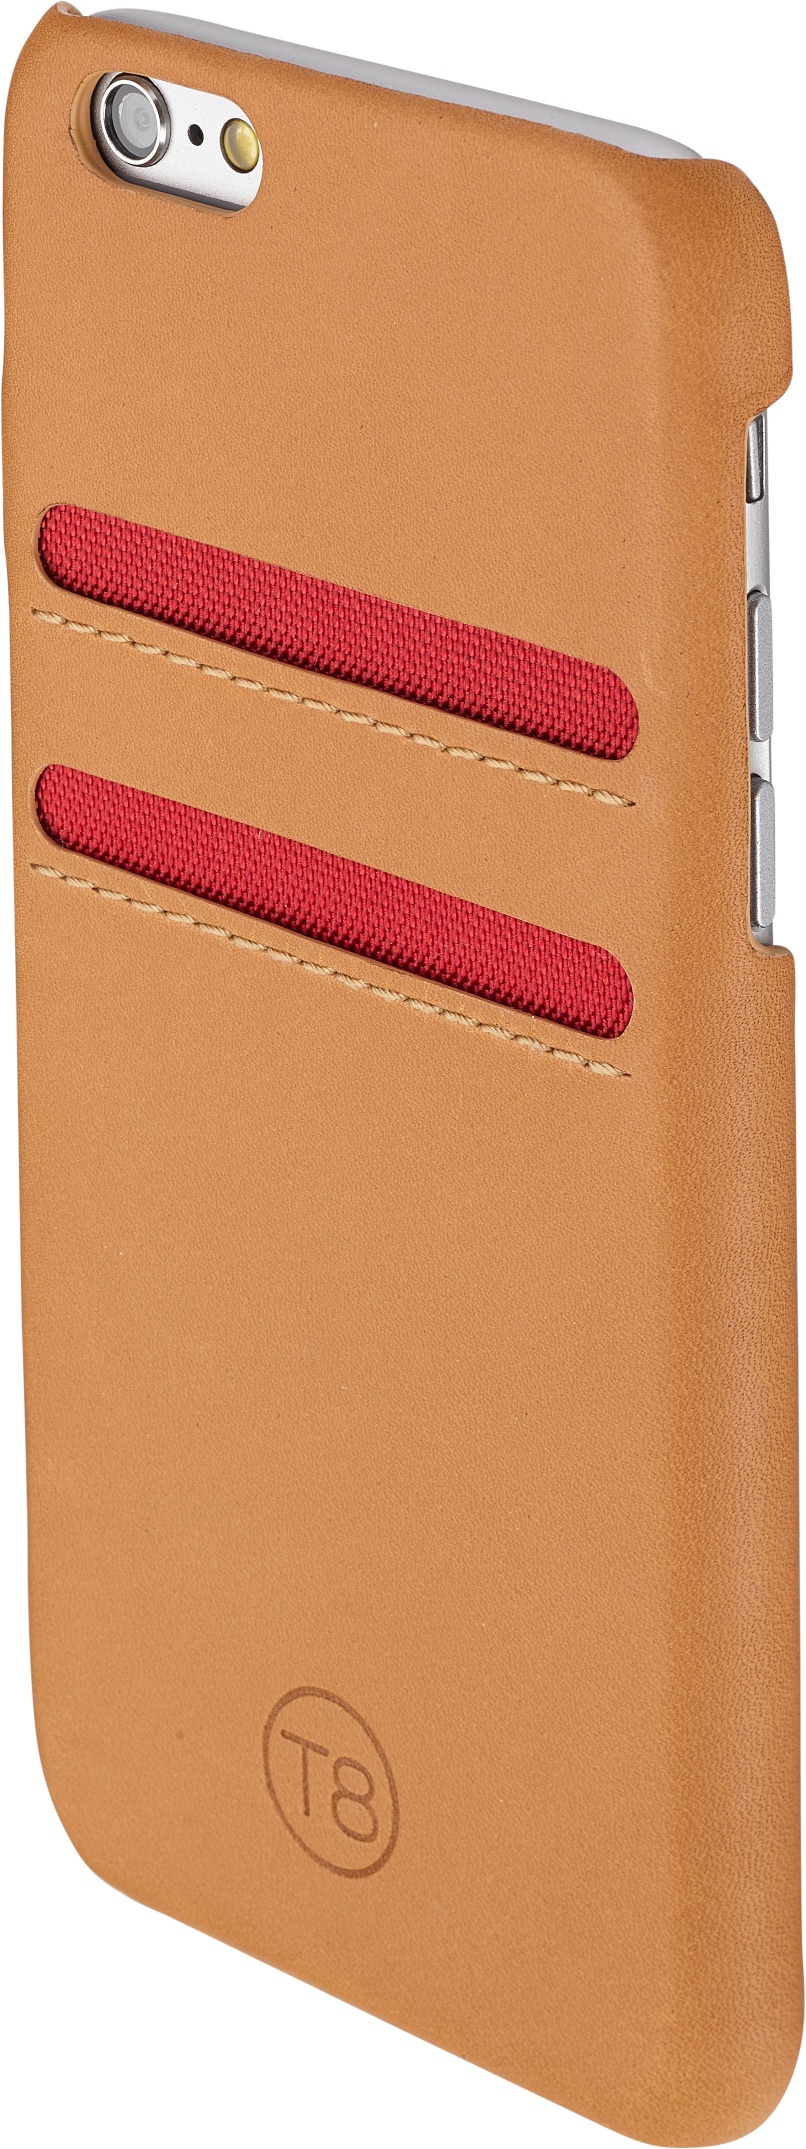 T8 Salt iPhone 6 wallet case in tan leather and red trim